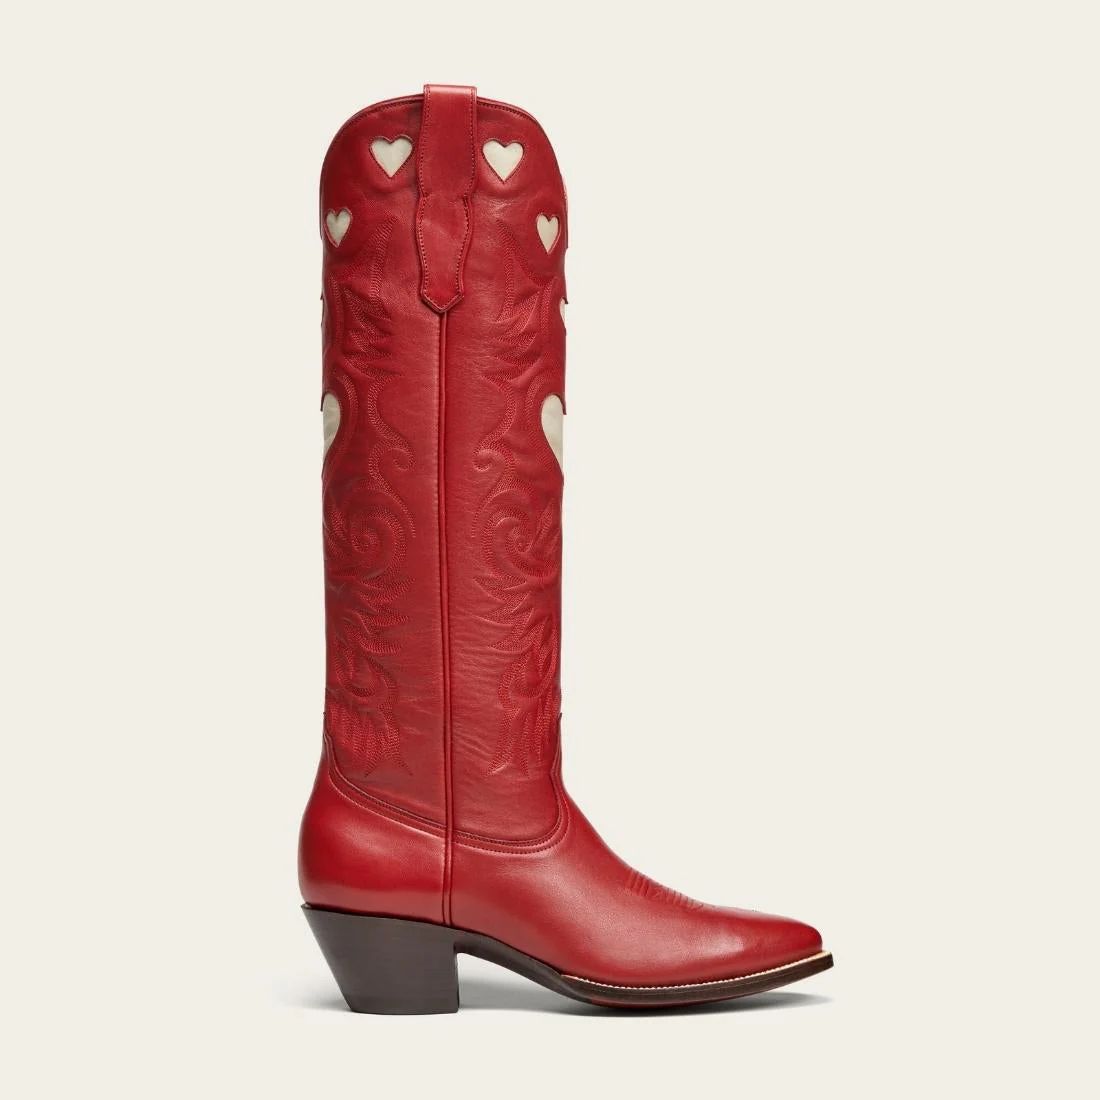 Red & Bone Heart Boot | CITY Boots